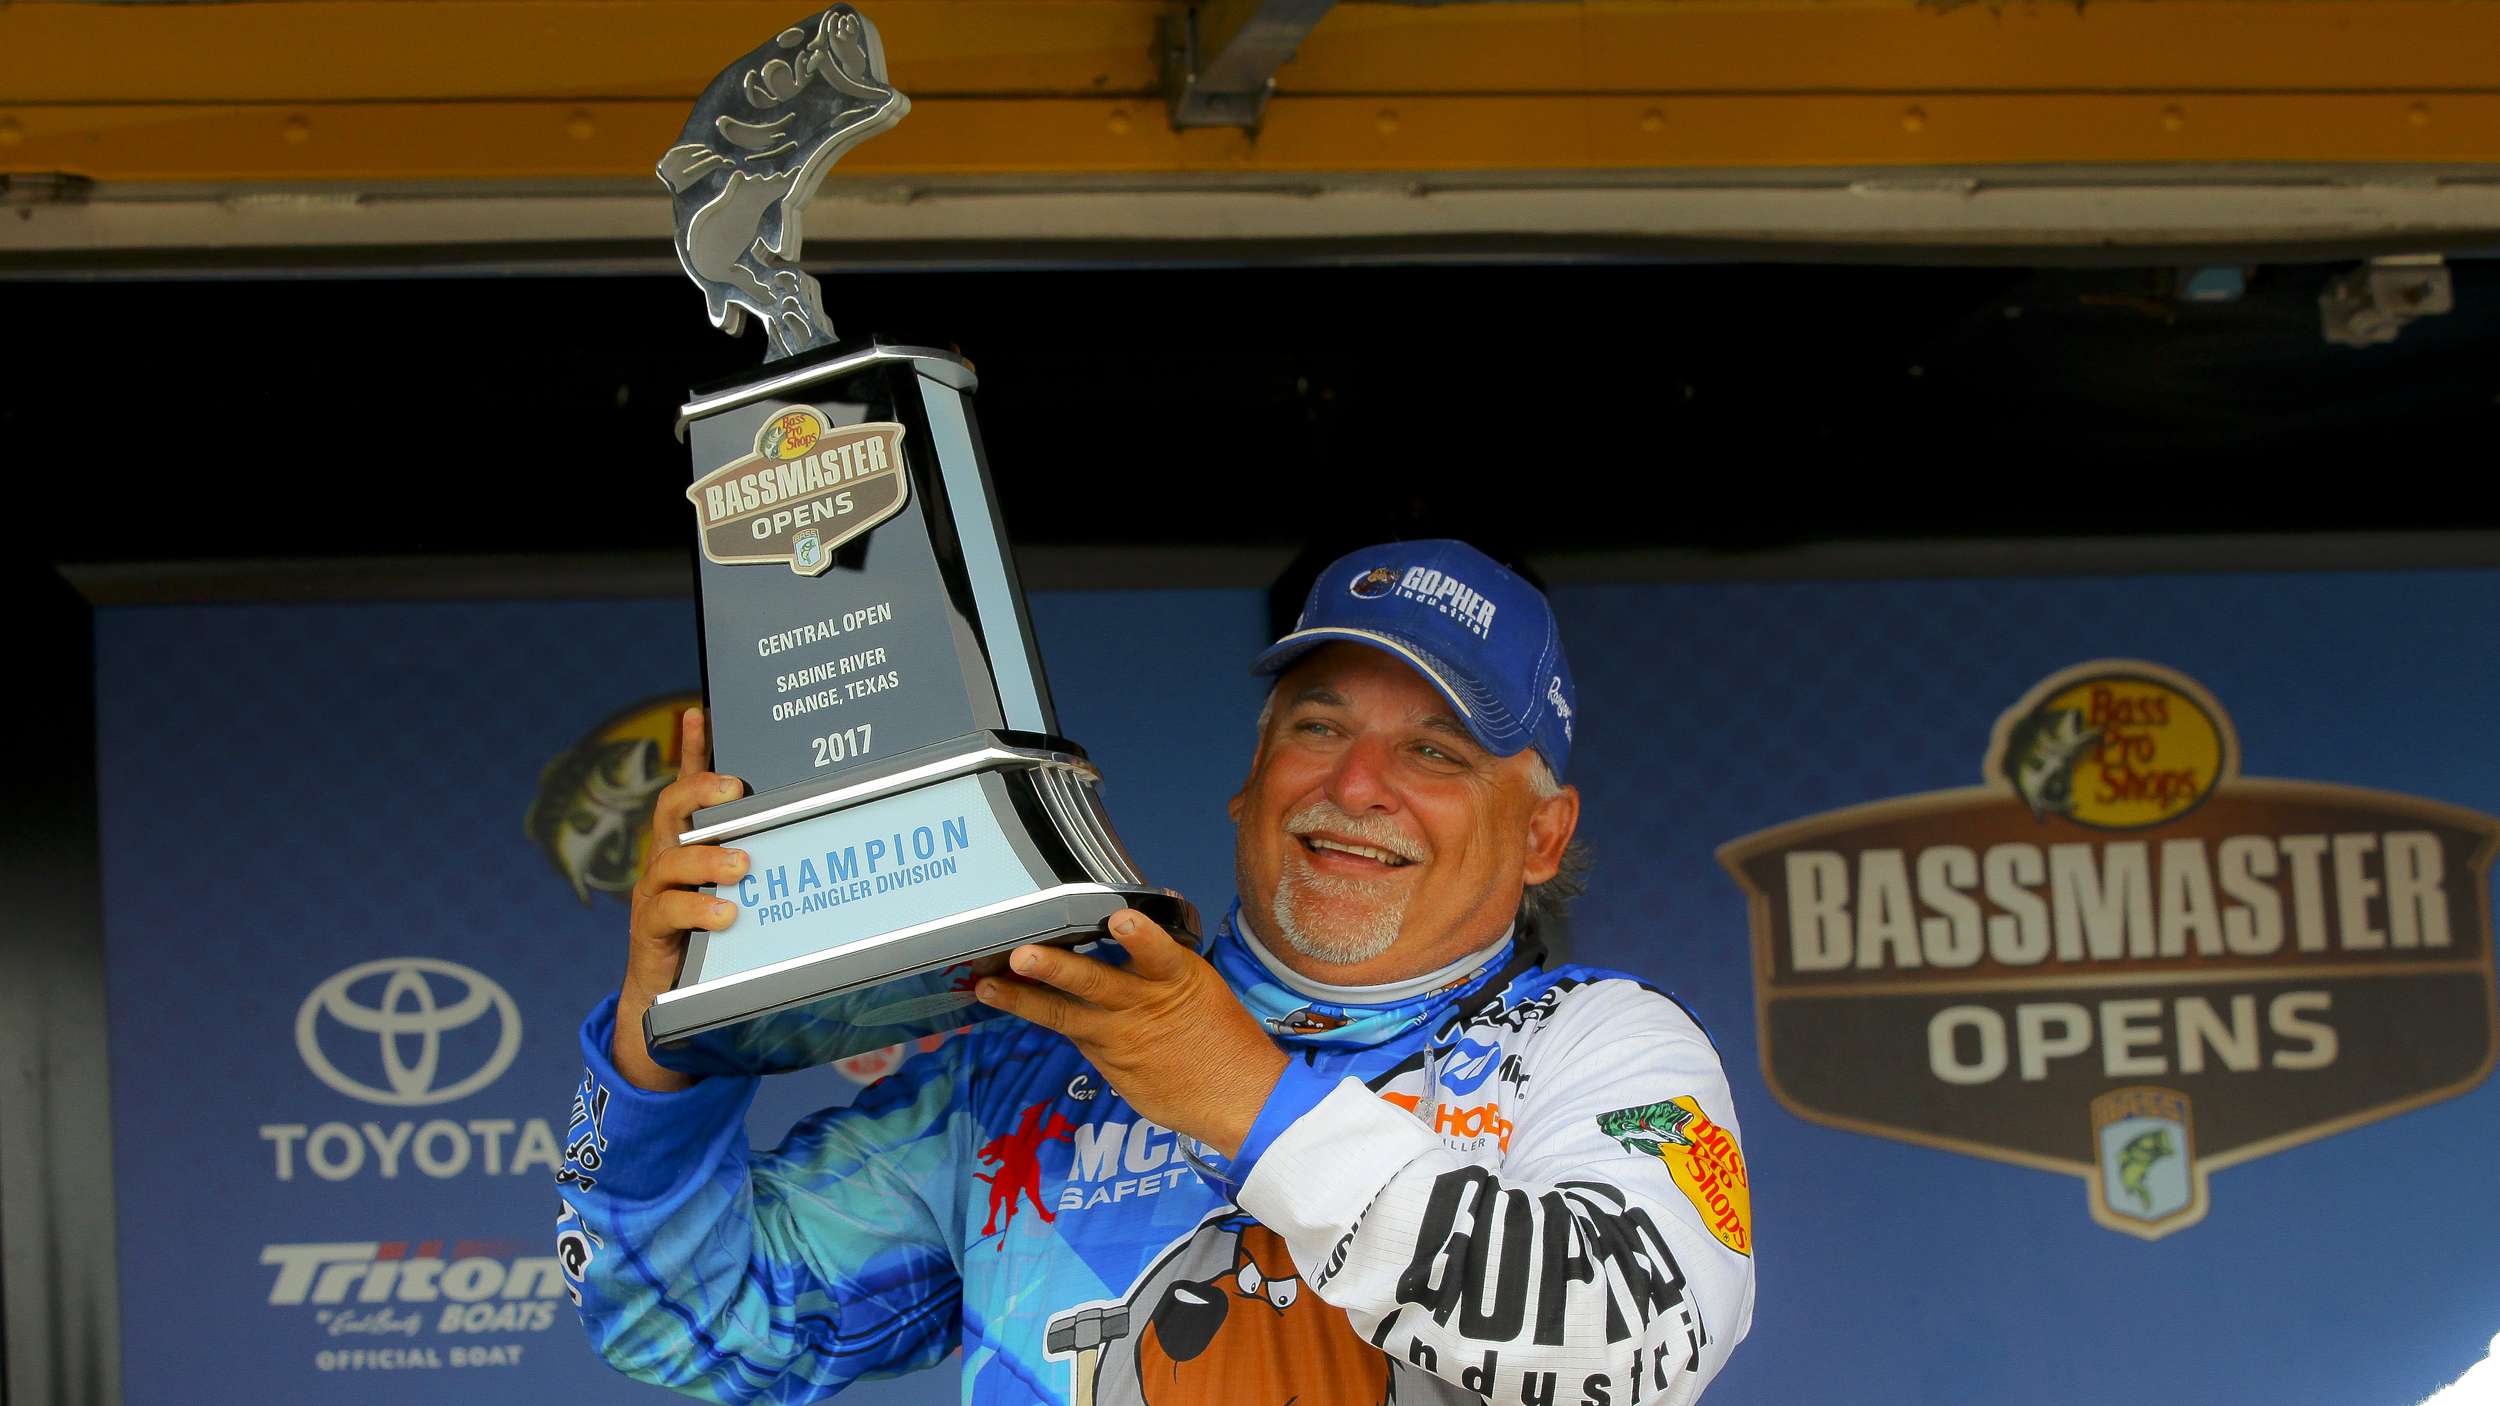 Carl Svebek III, who had just experienced a second resurrection of his fishing career, came in with 12 pounds, 3 ounces for a three-day total of 36-12, giving the 50-year-old an emotional win and berth to his first Classic.